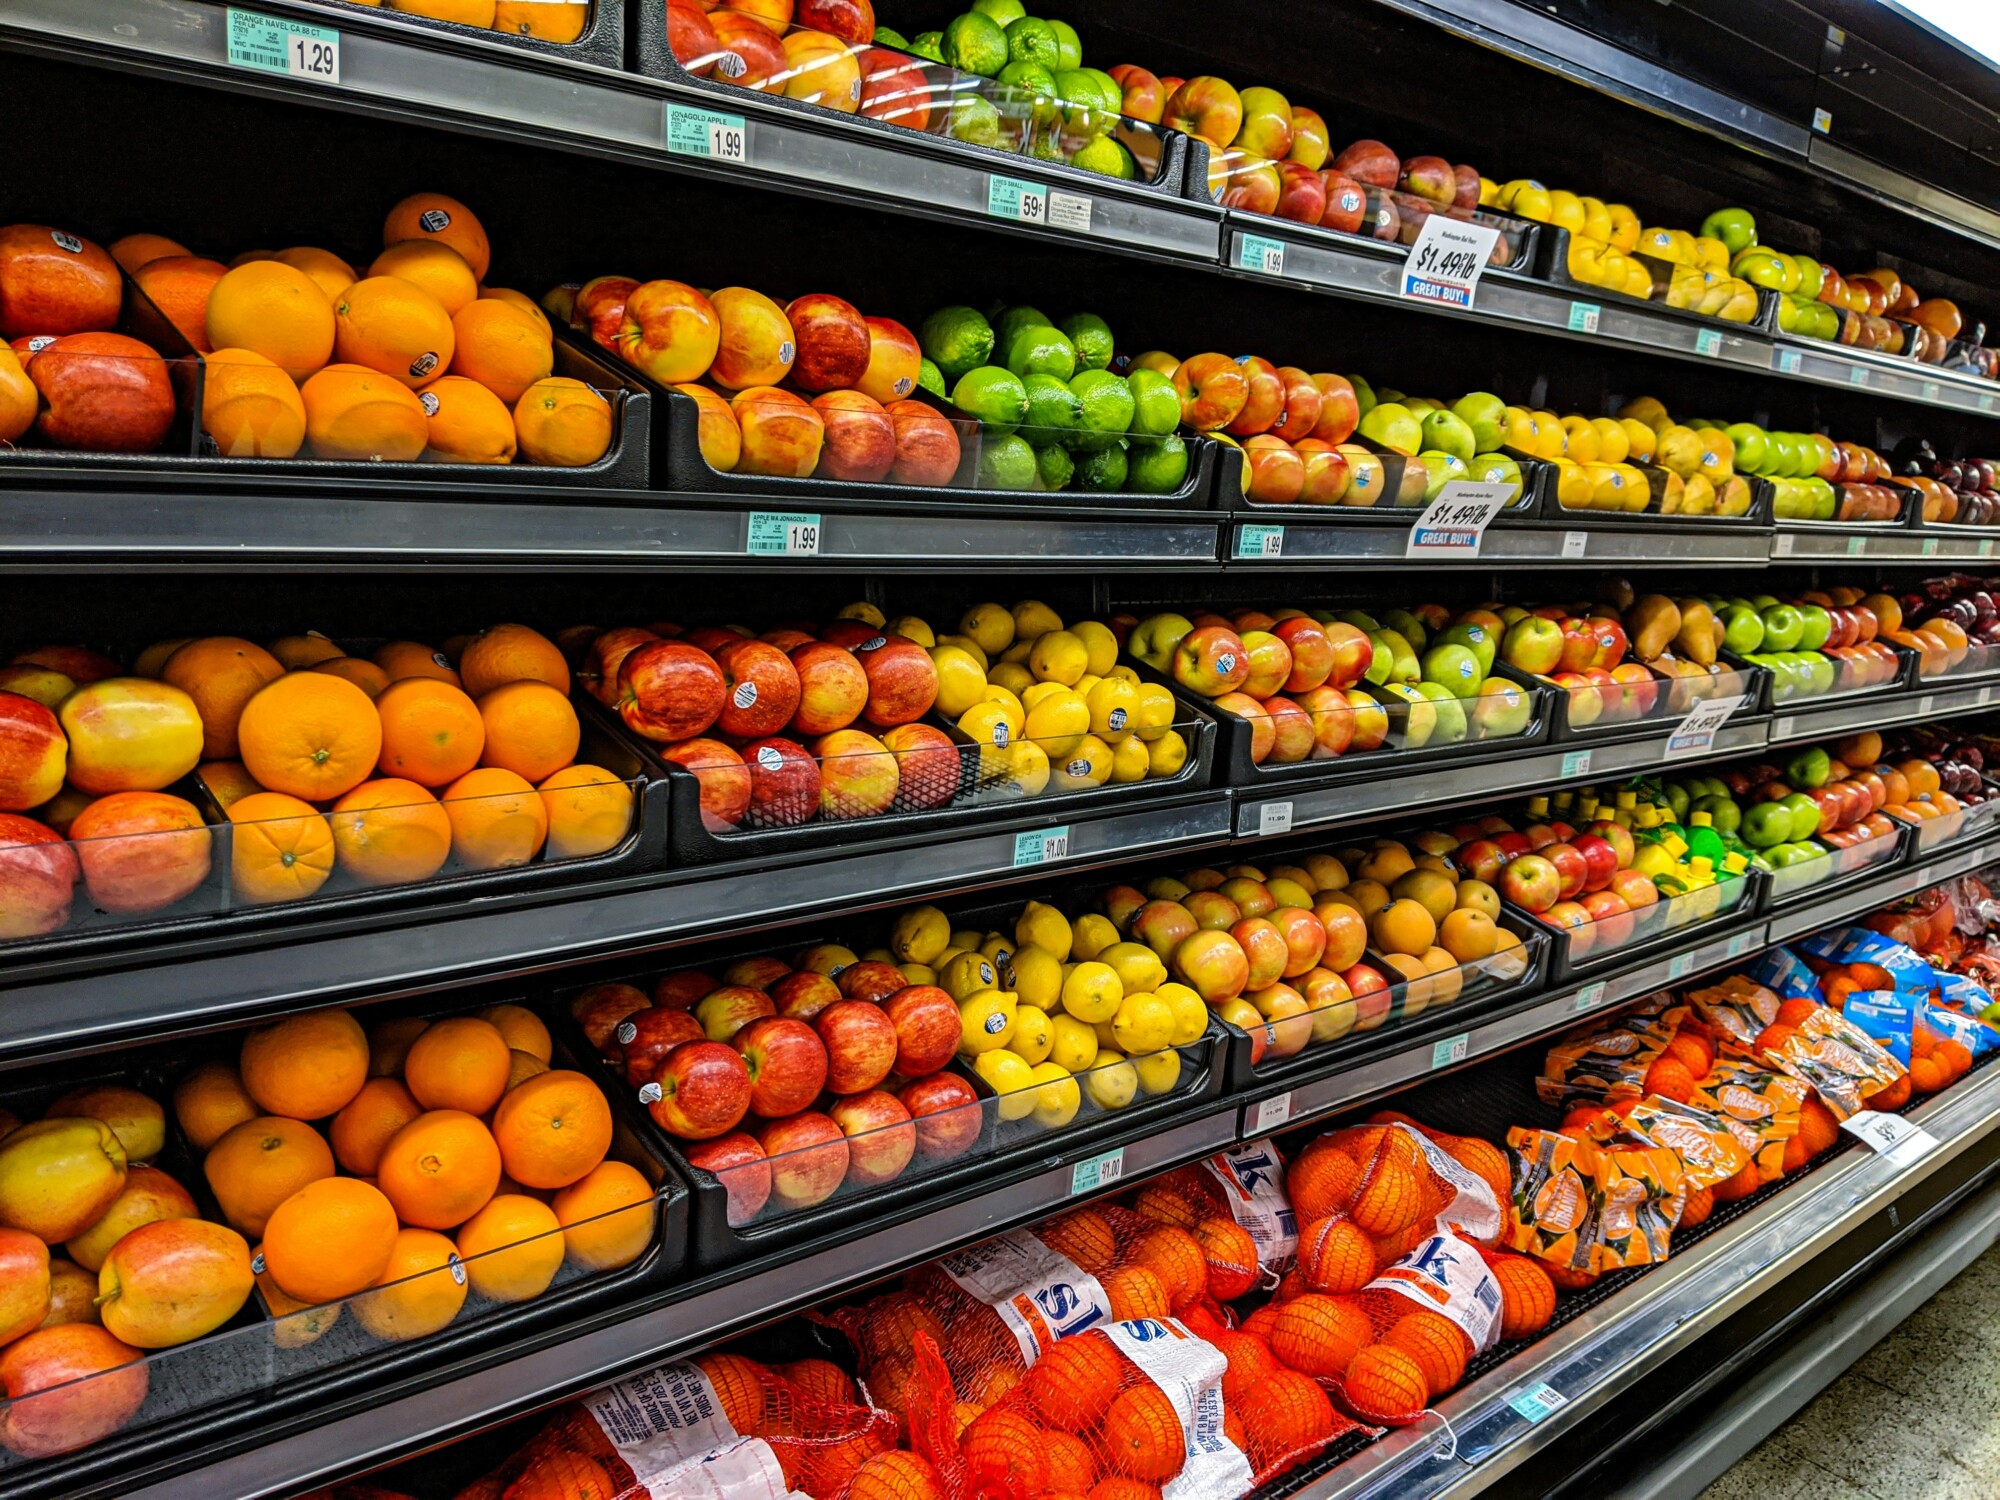 Photograph of fruit on shelves in a supermarket